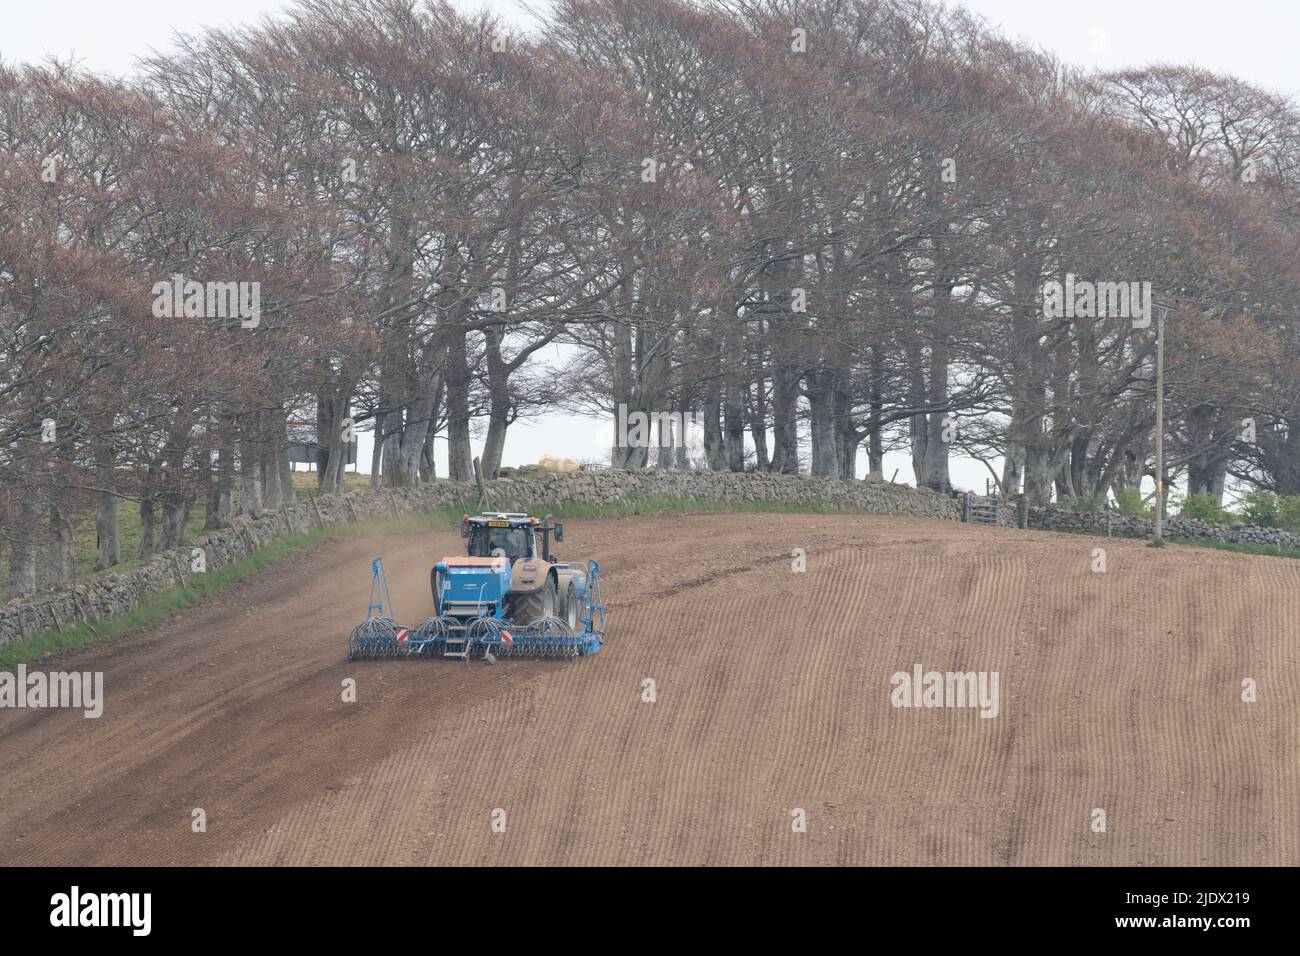 A Blue Tractor with a Lemken Solitair 9 Pneumatic Seed Drill Sowing in a Hillside Field on an Overcast Day Stock Photo